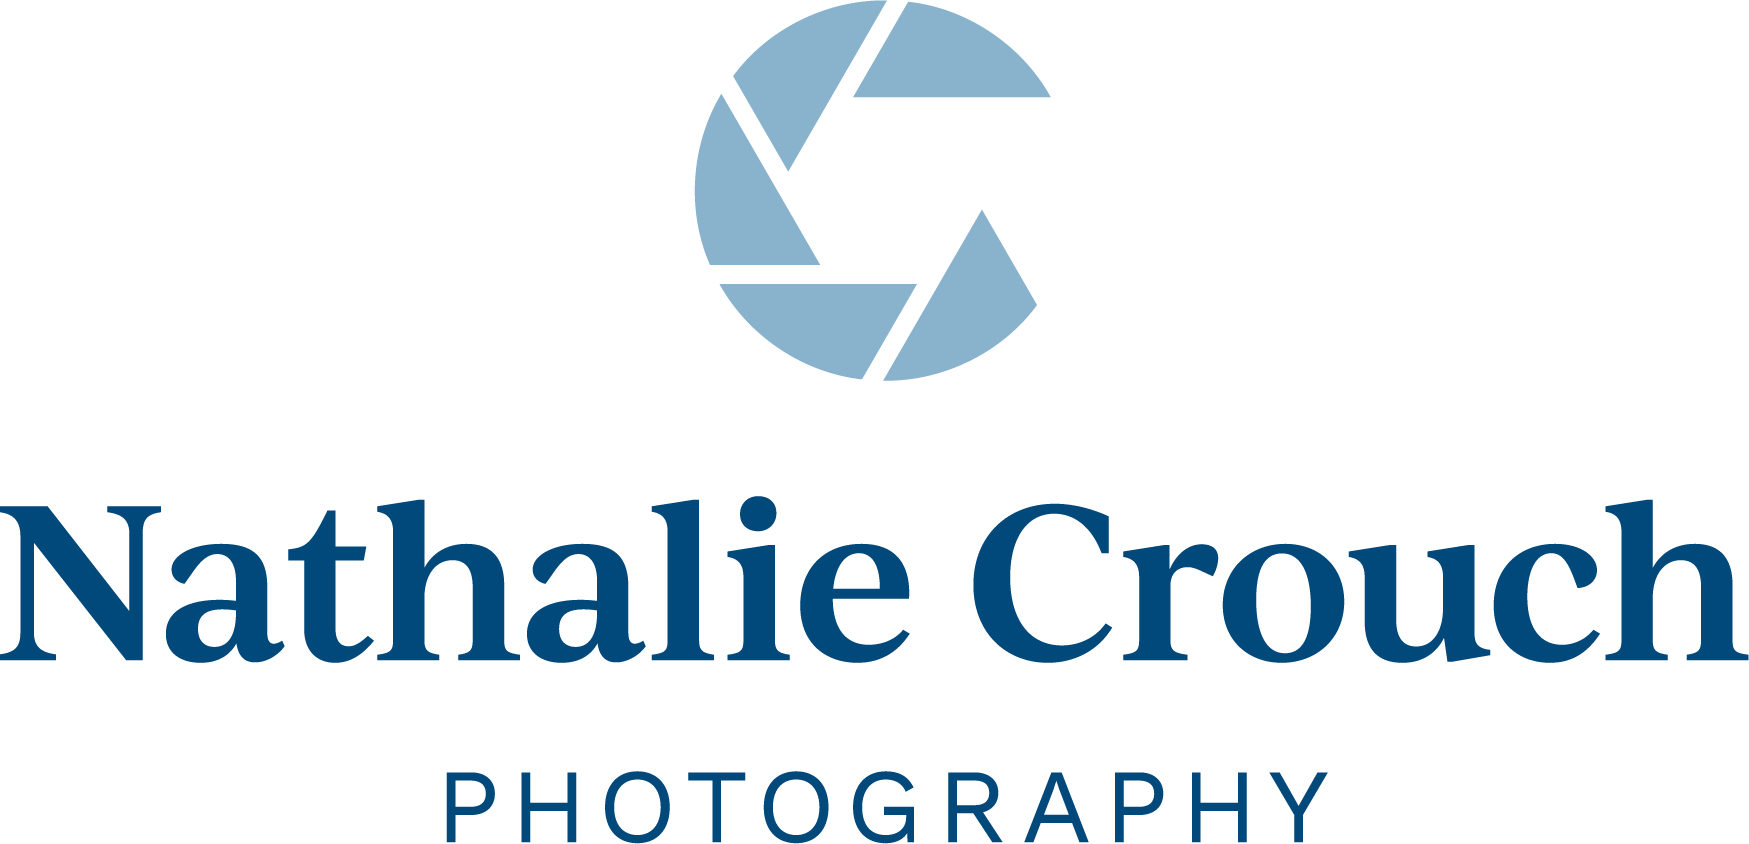 Nathalie Crouch Photography